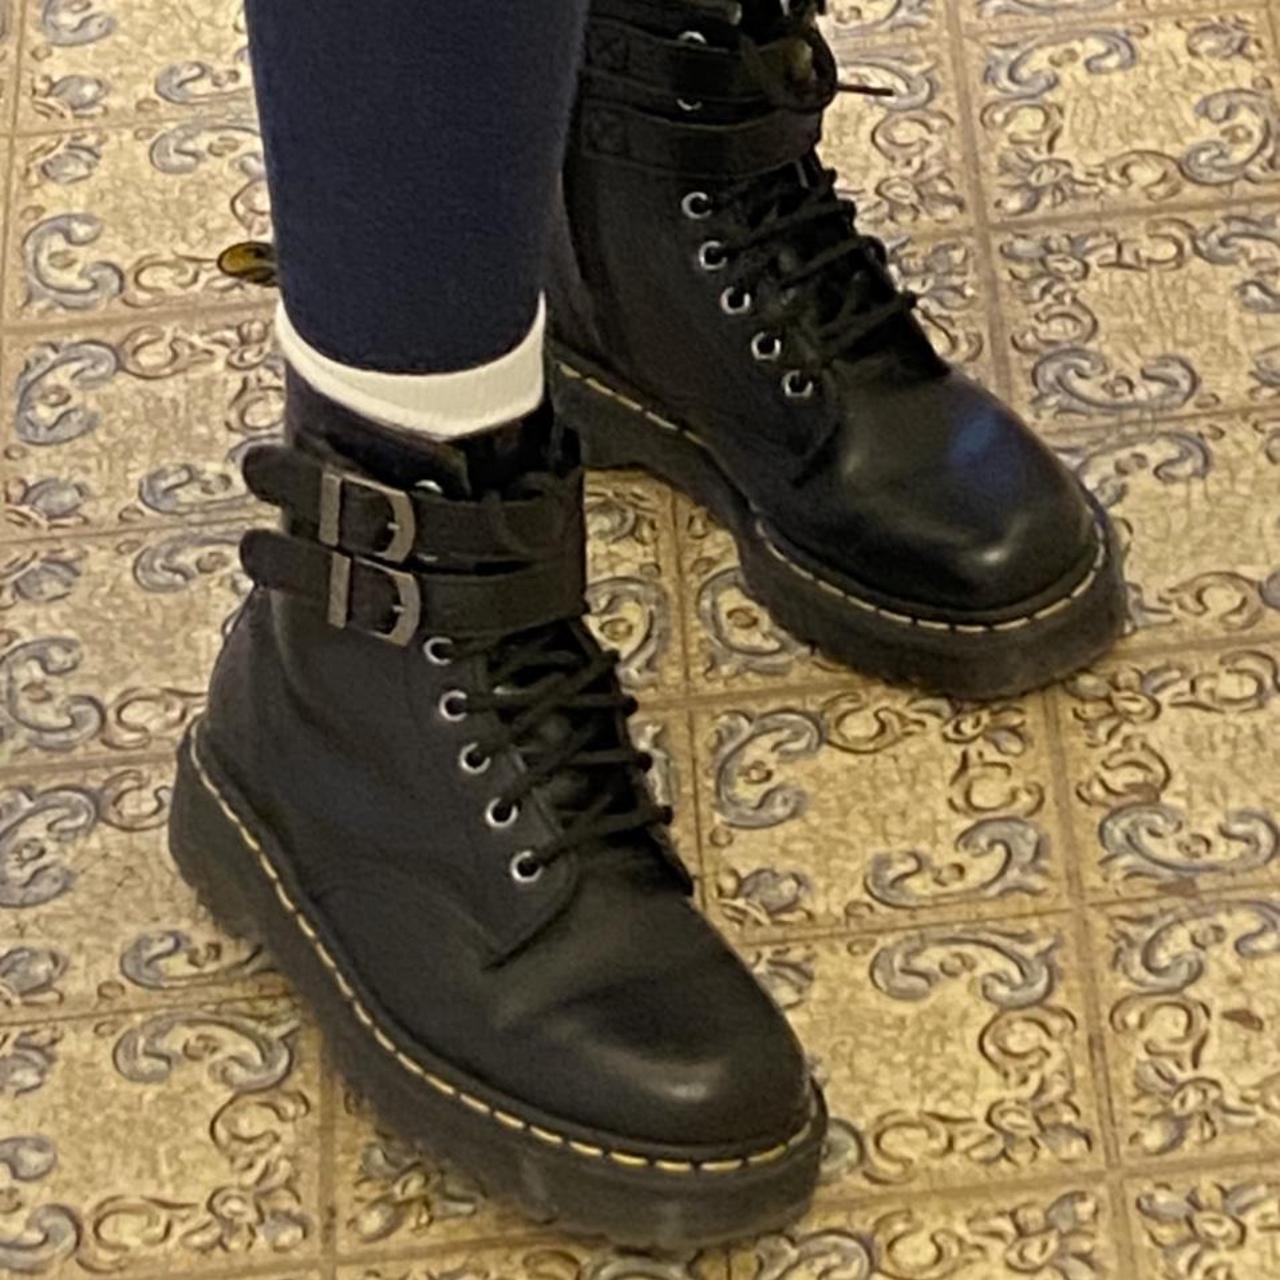 Product Image 2 - vegan leather doc martens! not